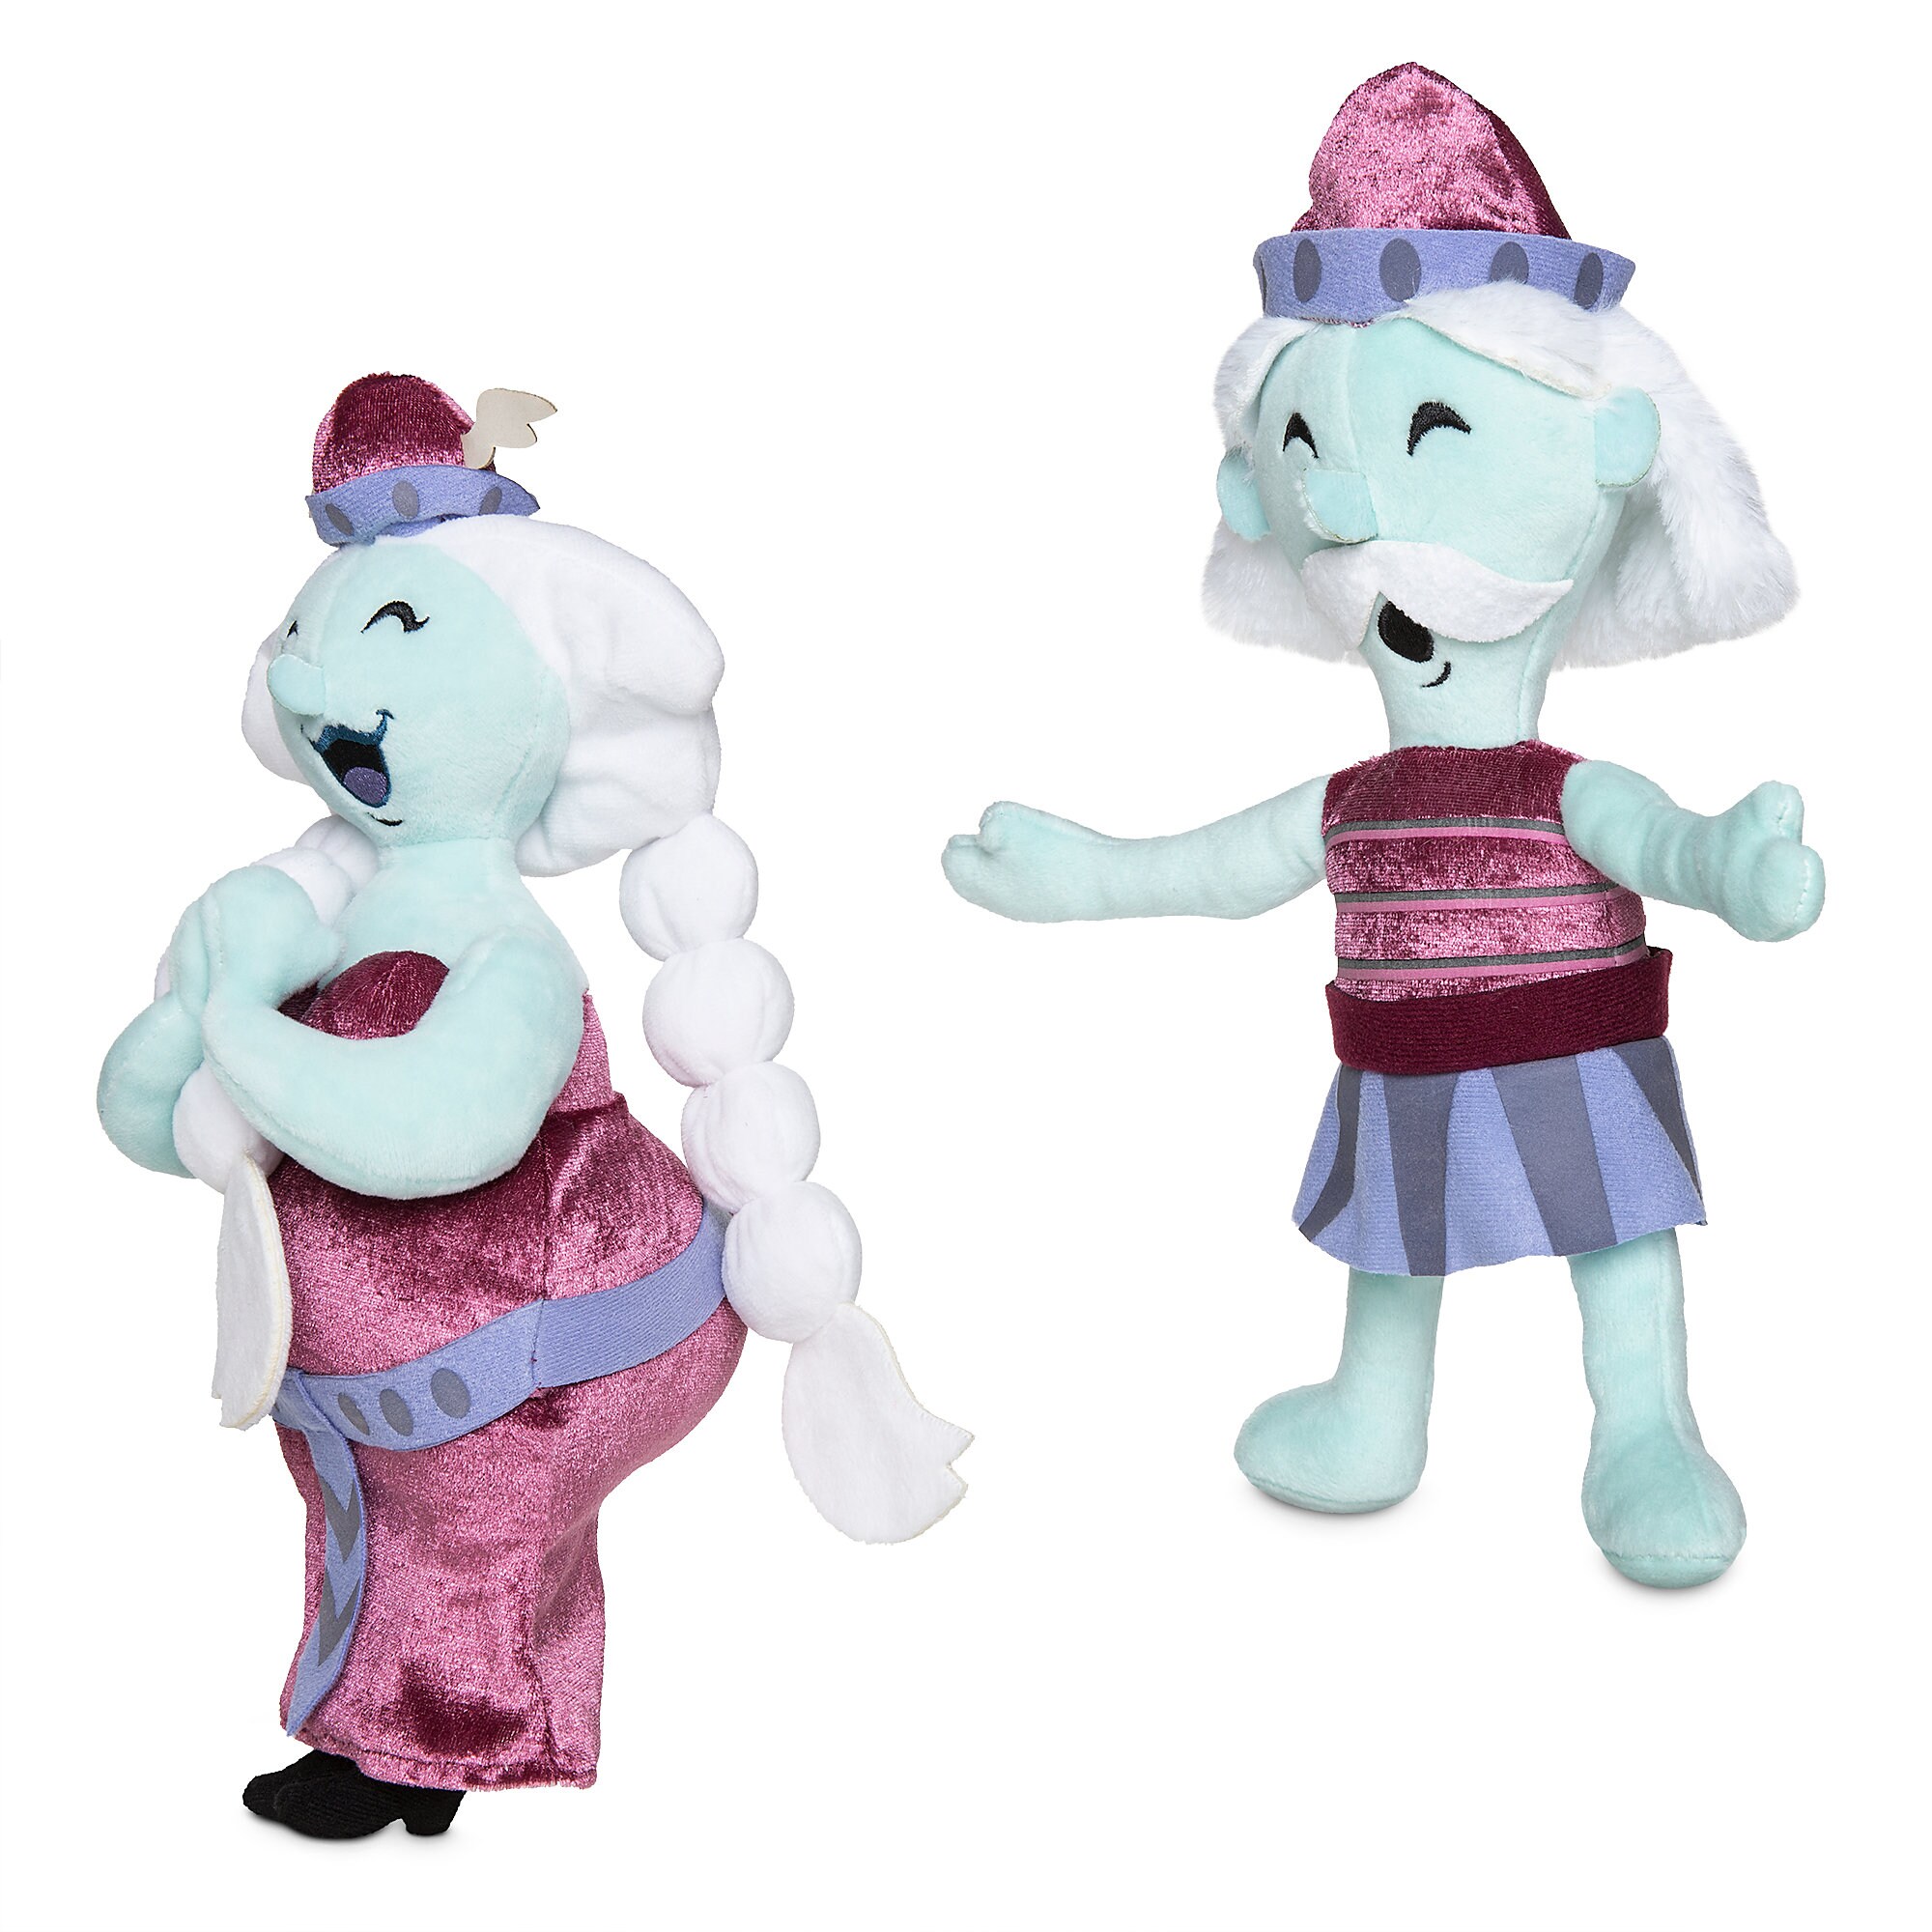 Opera Ghosts Plush Set - The Haunted Mansion - Limited Release